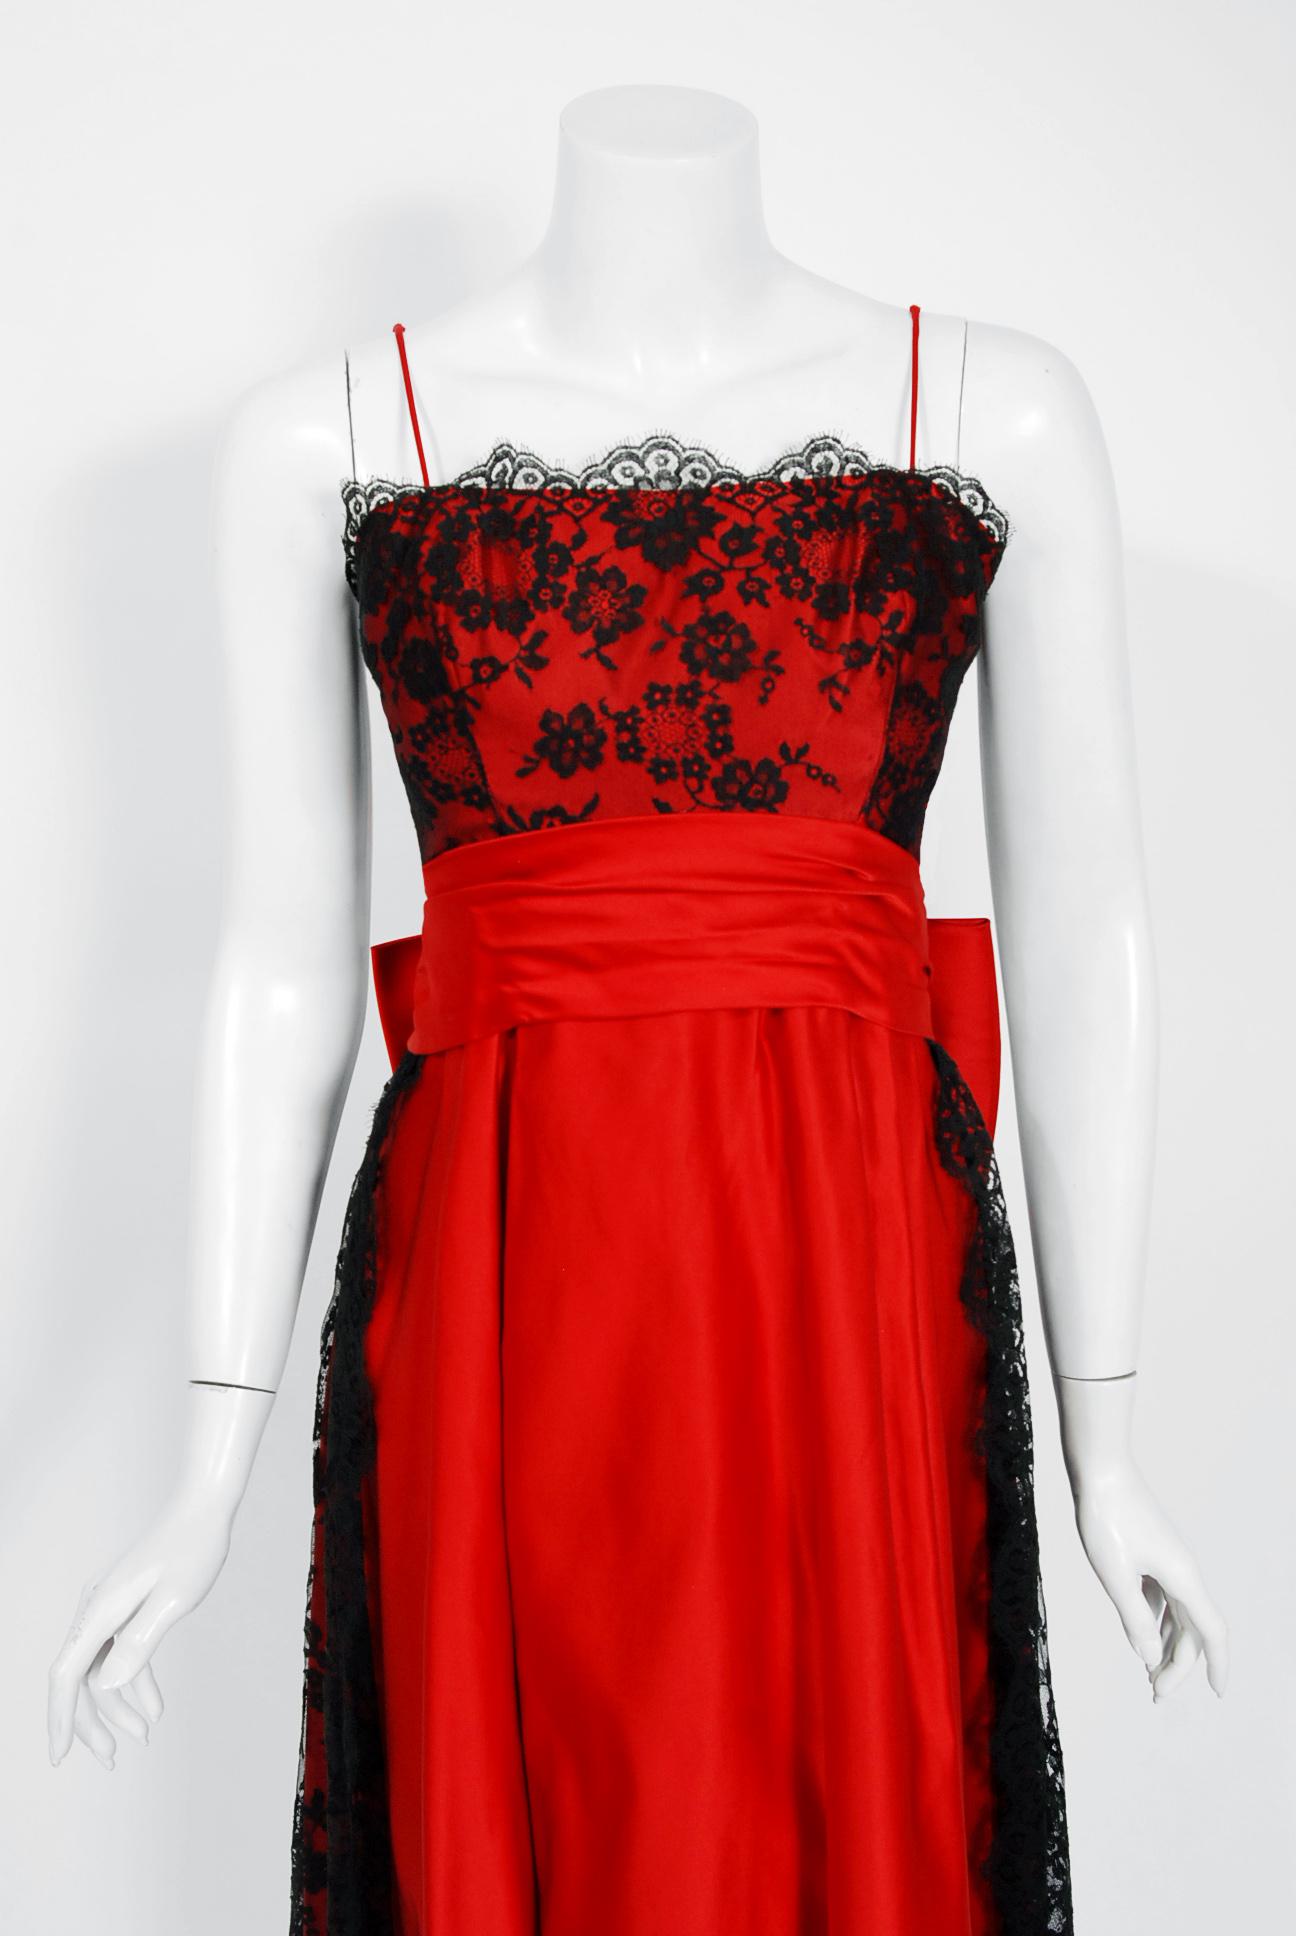 This is such a breathtaking and classic couture party dress from the iconic Ceil Chapman designer label. Perfect for any upcoming special event; you can't help but feel feminine in this beauty! The garment is fashioned from stunning mid-weight ruby